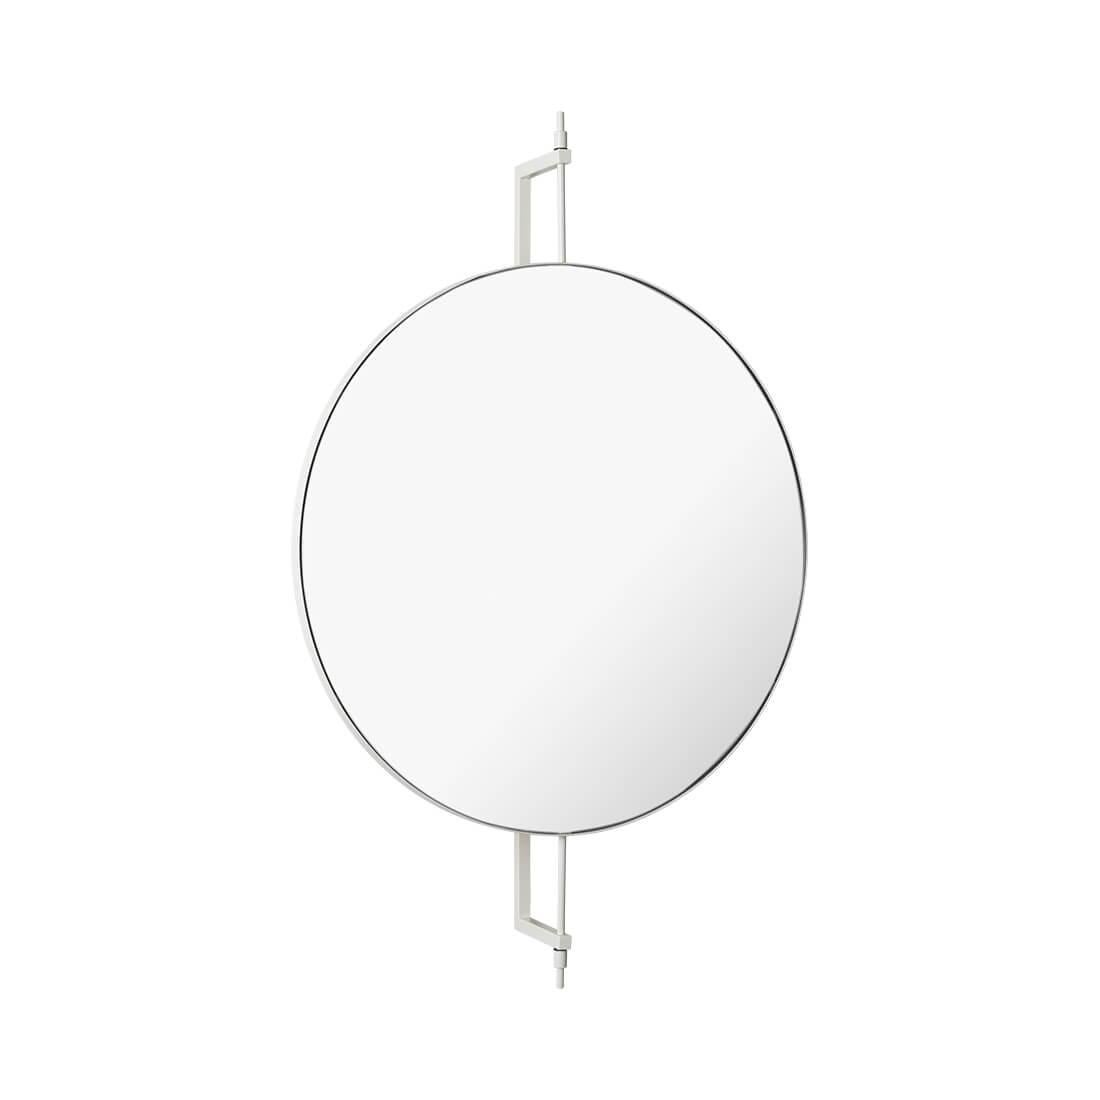 Circle rotating mirror by Kristina Dam Studio
Materials: Beige powder-coated steel. Mirror.
  
Dimensions: 13.5 x 60 x h 91cm.

The Modernist furniture collection takes notions of modern design and yet the distinctive design touch of Kristina